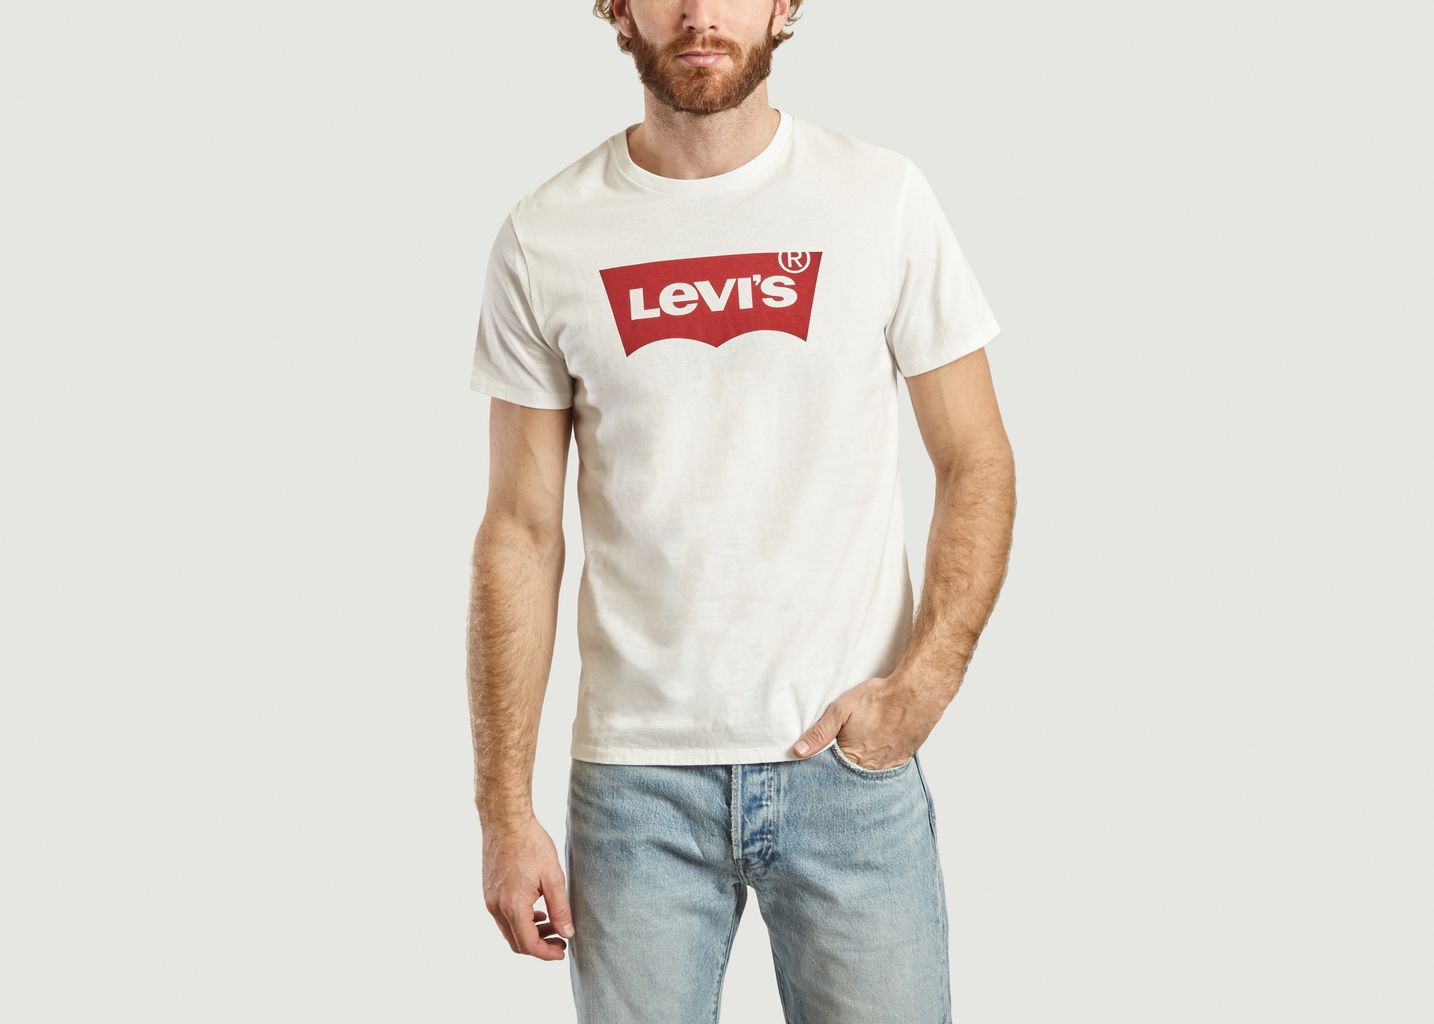 white and red levis t shirt